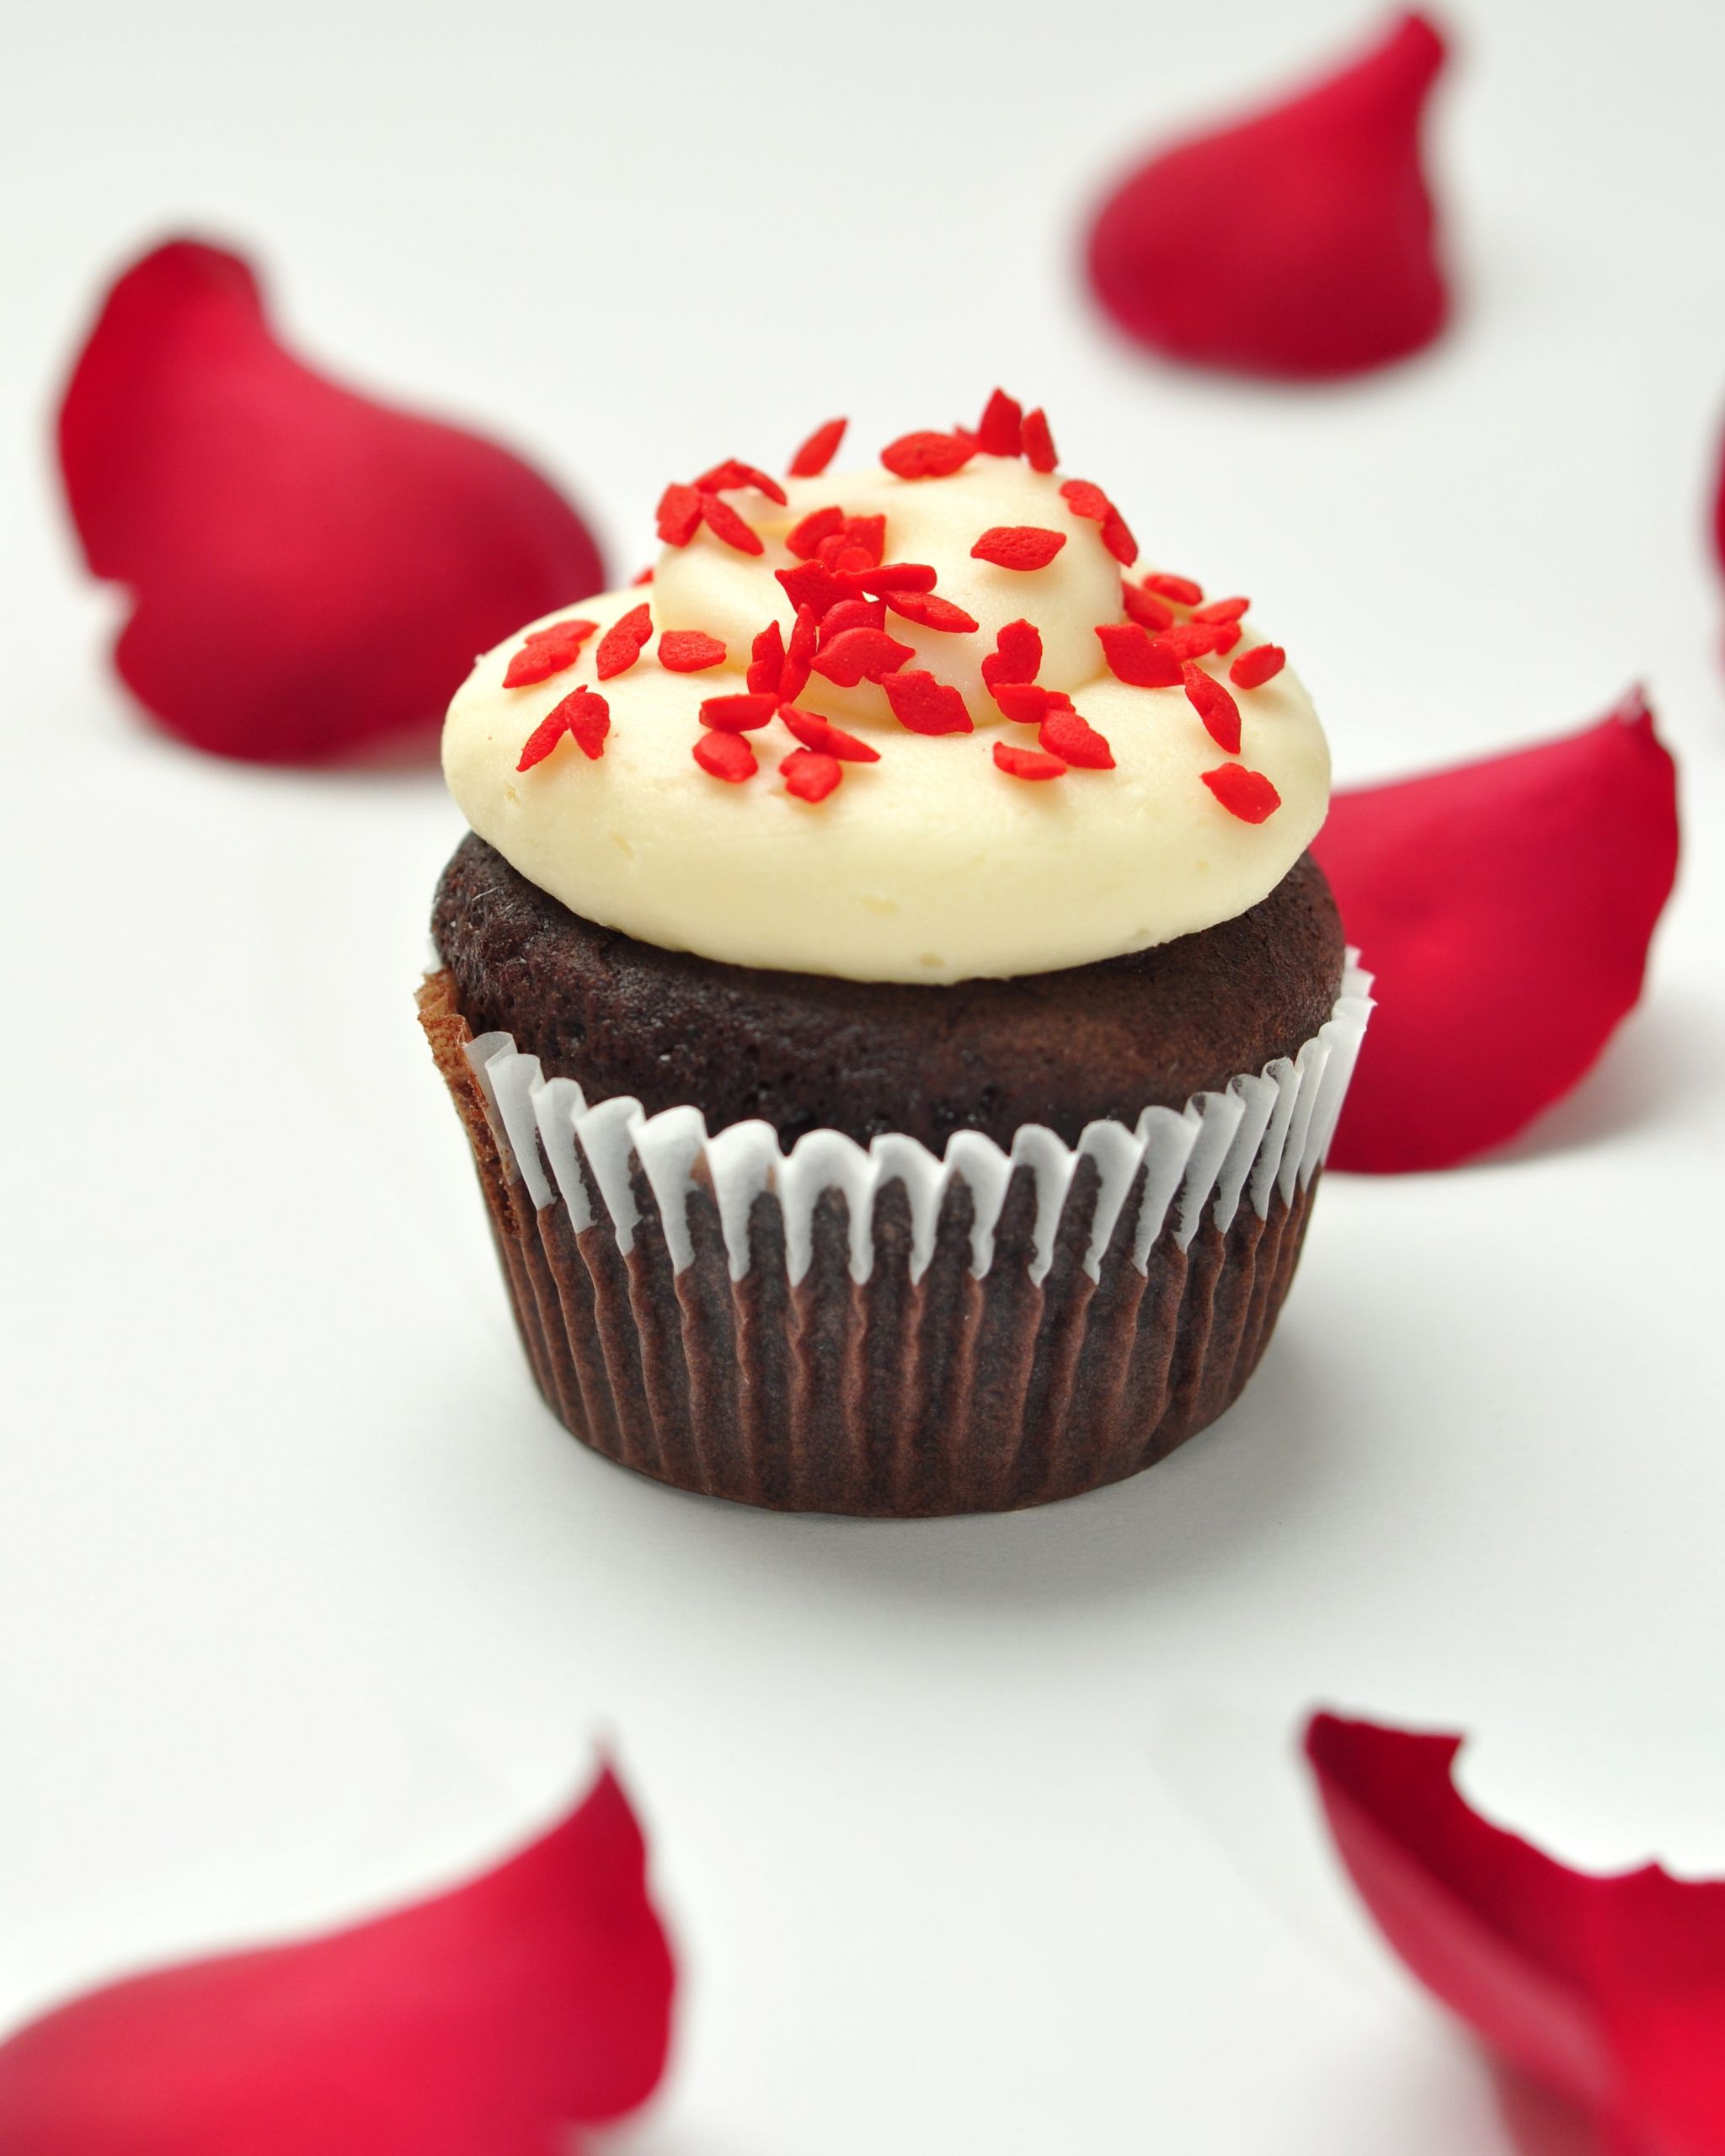 Valentines Day Cakes and Cupcakes Awesome Valentines Day Cakes Cupcakes Mumbai 1 Cakes and